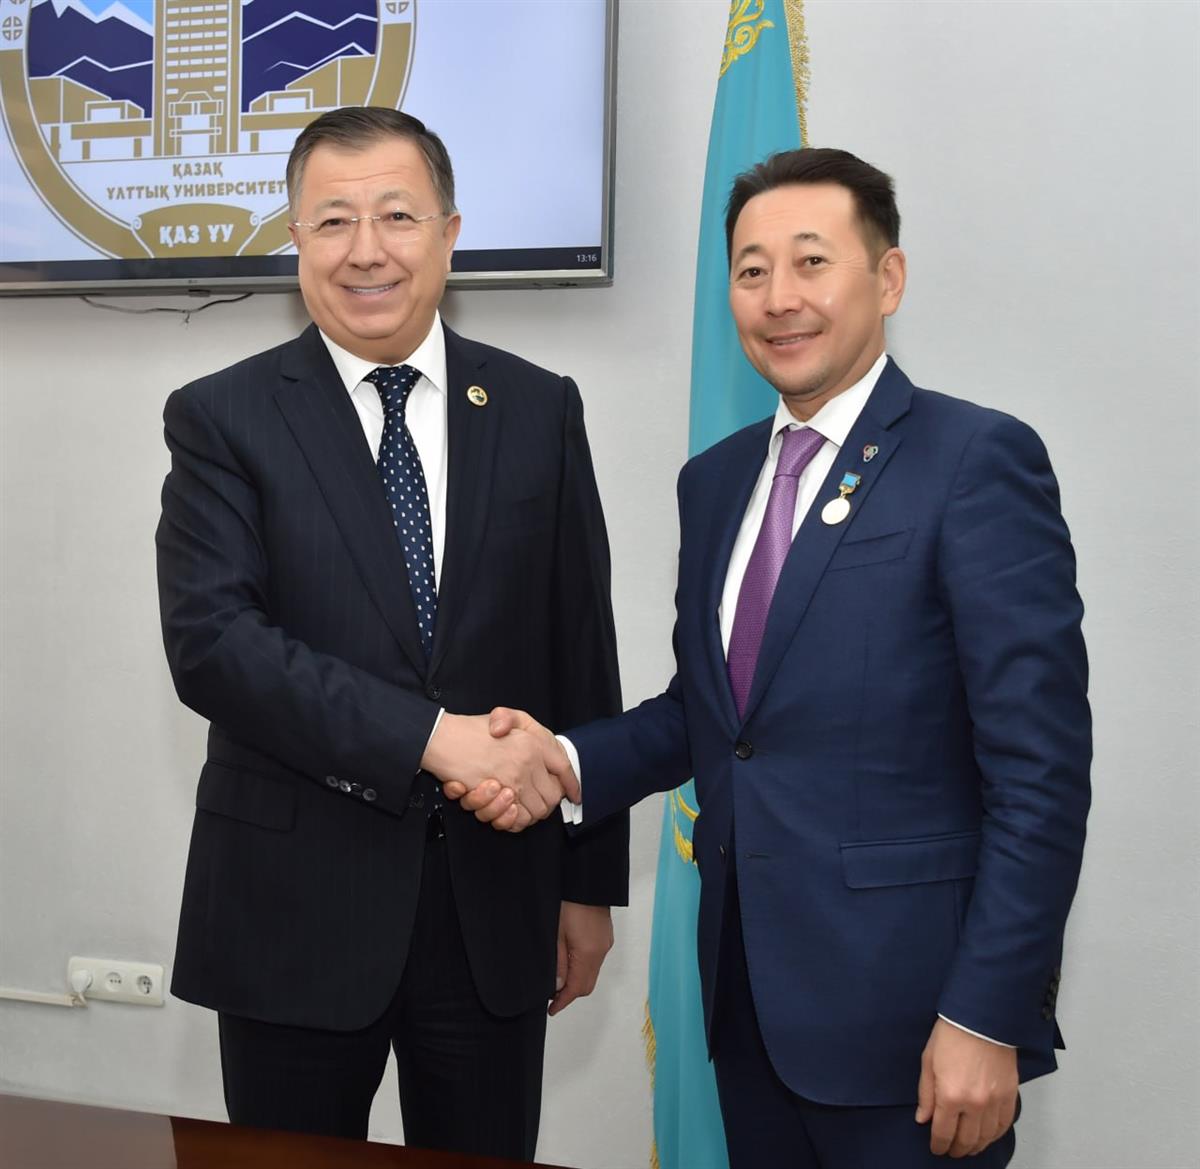 KAZNU ESTABLISHES COOPERATION WITH THE CONFERENCE ON INTERACTION AND CONFIDENCE BUILDING MEASURES IN ASIA